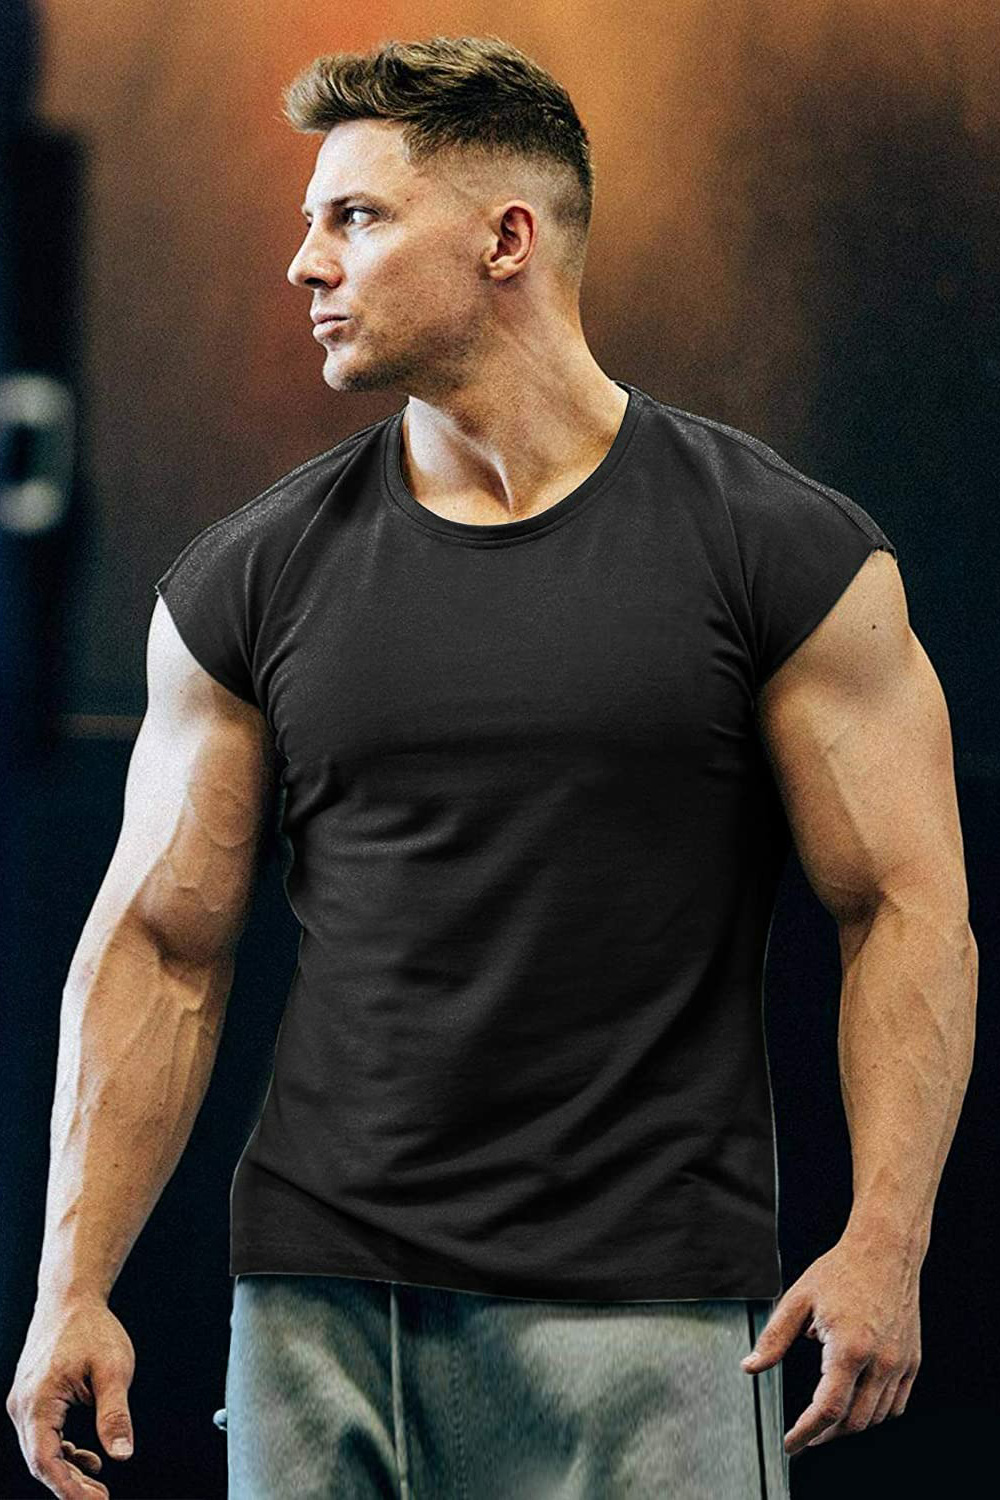 Men's Gym Workout Muscle Cut Bodybuilding Training Fitness Tee Tops